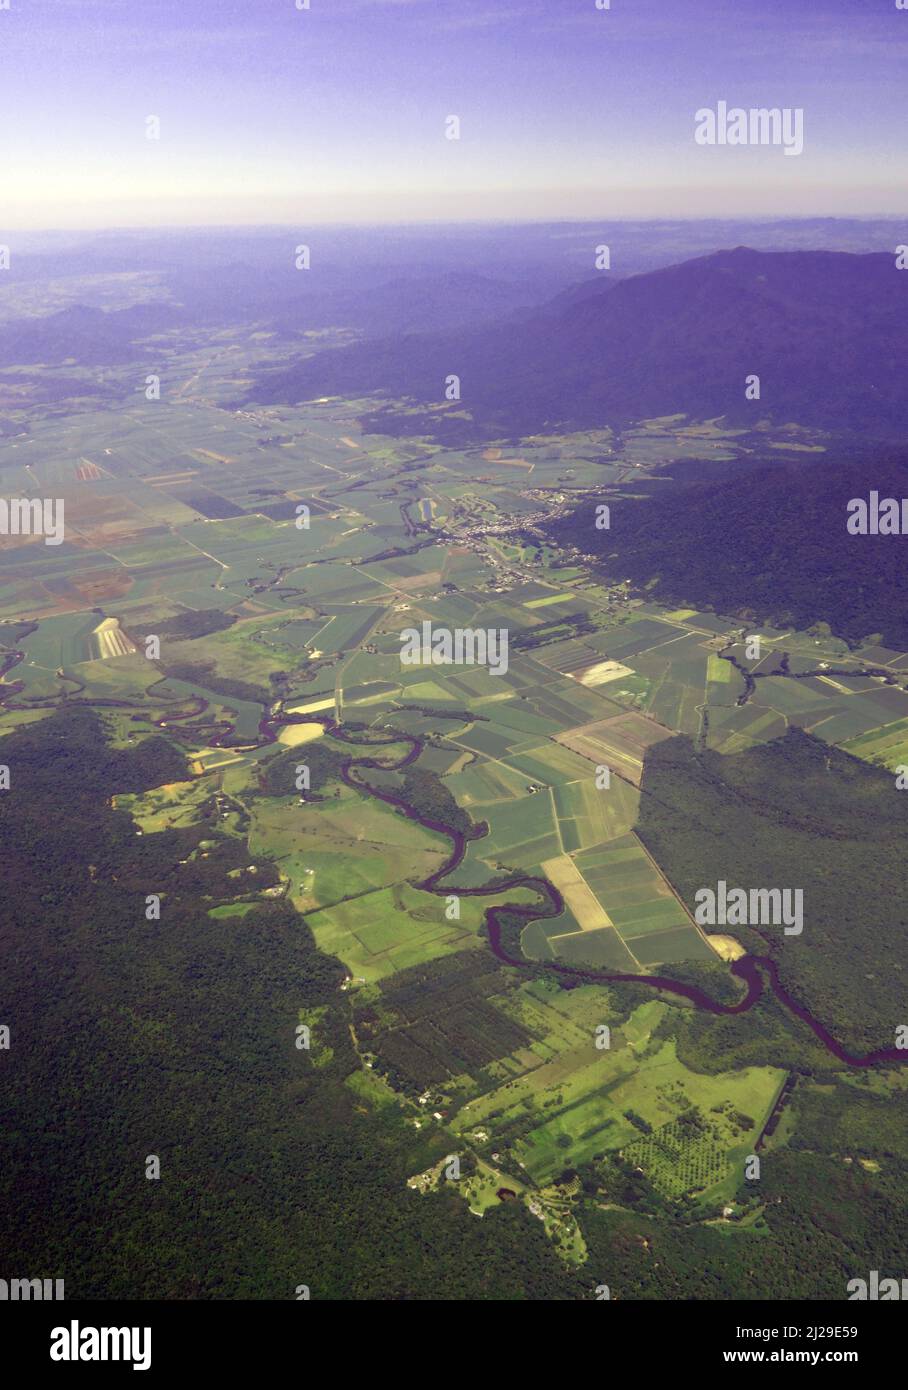 Aerial view of agricultural land uses around Babinda, south of Cairns, Queensland, Australia Stock Photo